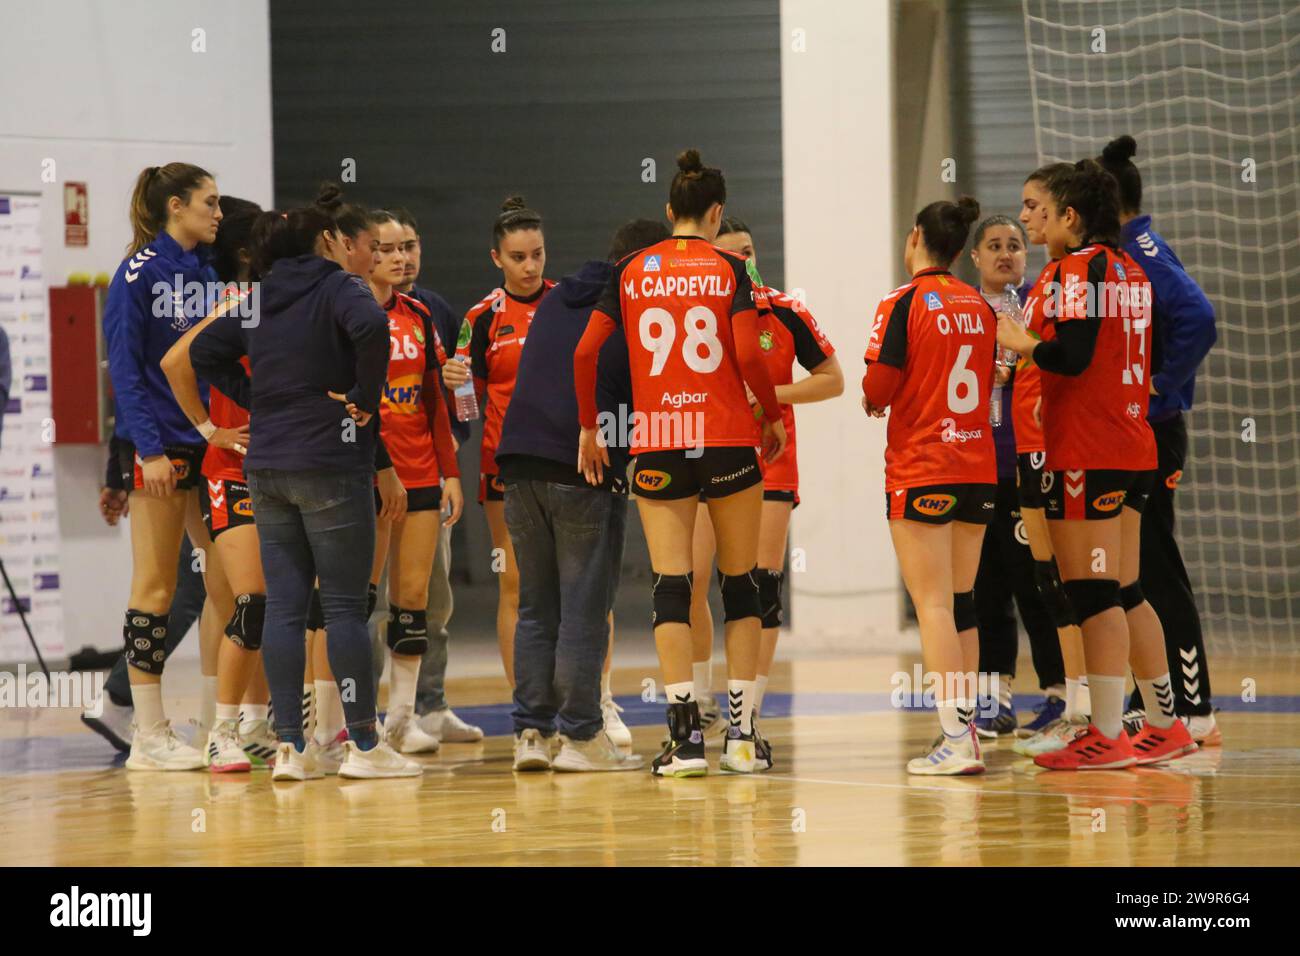 Oviedo, Spain, December 29, 2023: The KH-7 BM players. Granollers receive instructions during a time-out during the 13th Matchday of the Iberdrola Guerreras League between Lobas Global Atac Oviedo and KH-7 BM. Granollers, on December 29, 2023, at the Florida Arena Municipal Sports Center, in Oviedo, Spain. Credit: Alberto Brevers / Alamy Live News. Stock Photo